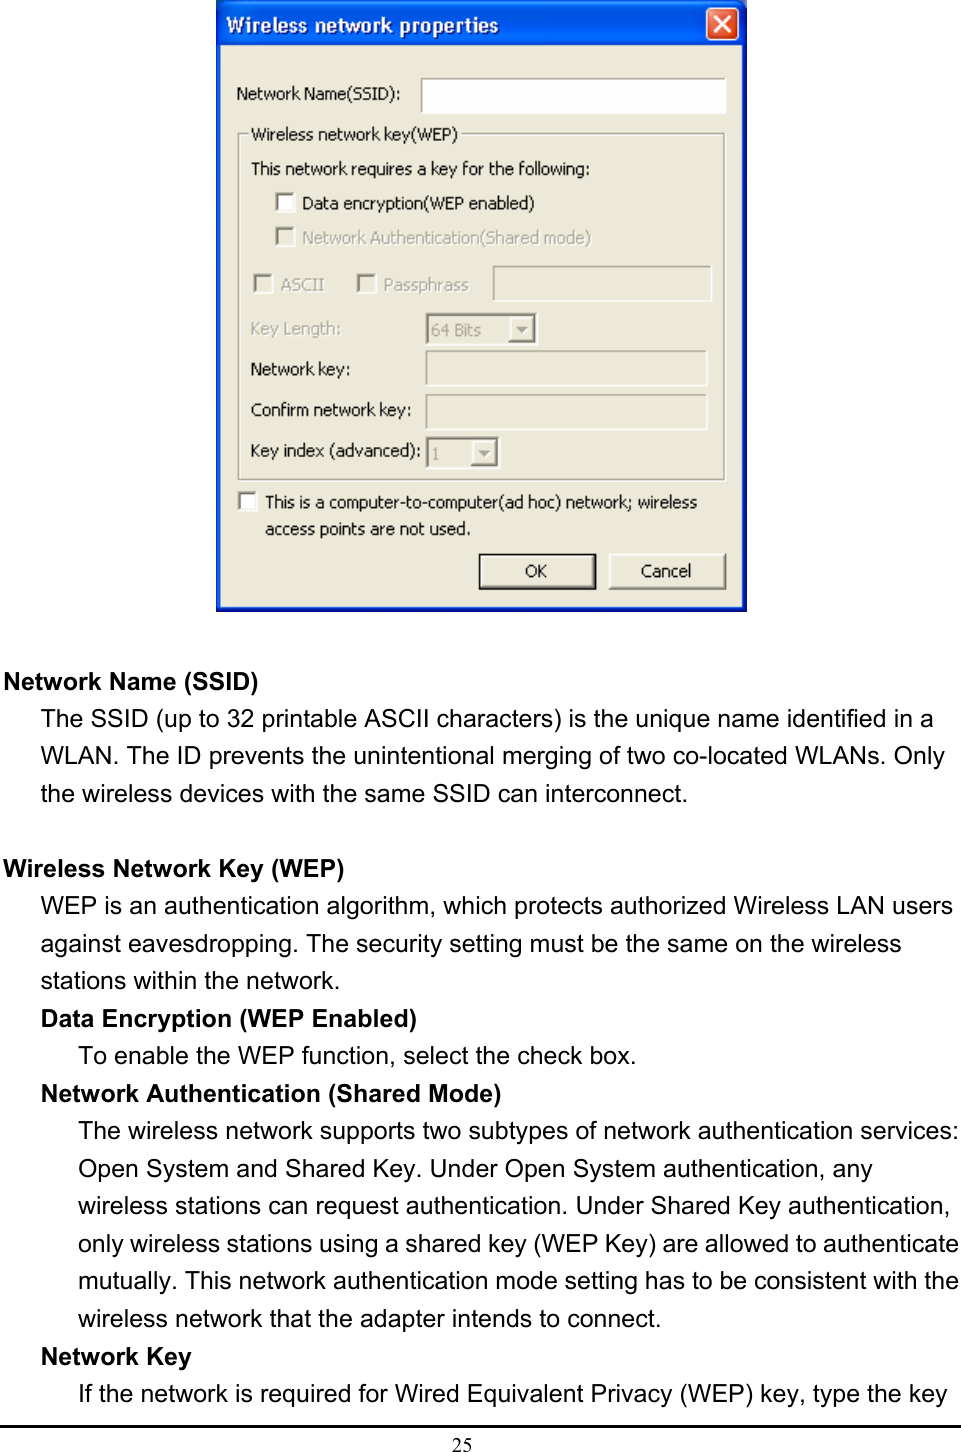  25    Network Name (SSID) The SSID (up to 32 printable ASCII characters) is the unique name identified in a WLAN. The ID prevents the unintentional merging of two co-located WLANs. Only the wireless devices with the same SSID can interconnect.  Wireless Network Key (WEP) WEP is an authentication algorithm, which protects authorized Wireless LAN users against eavesdropping. The security setting must be the same on the wireless stations within the network. Data Encryption (WEP Enabled) To enable the WEP function, select the check box. Network Authentication (Shared Mode) The wireless network supports two subtypes of network authentication services: Open System and Shared Key. Under Open System authentication, any wireless stations can request authentication. Under Shared Key authentication, only wireless stations using a shared key (WEP Key) are allowed to authenticate mutually. This network authentication mode setting has to be consistent with the wireless network that the adapter intends to connect. Network Key If the network is required for Wired Equivalent Privacy (WEP) key, type the key 